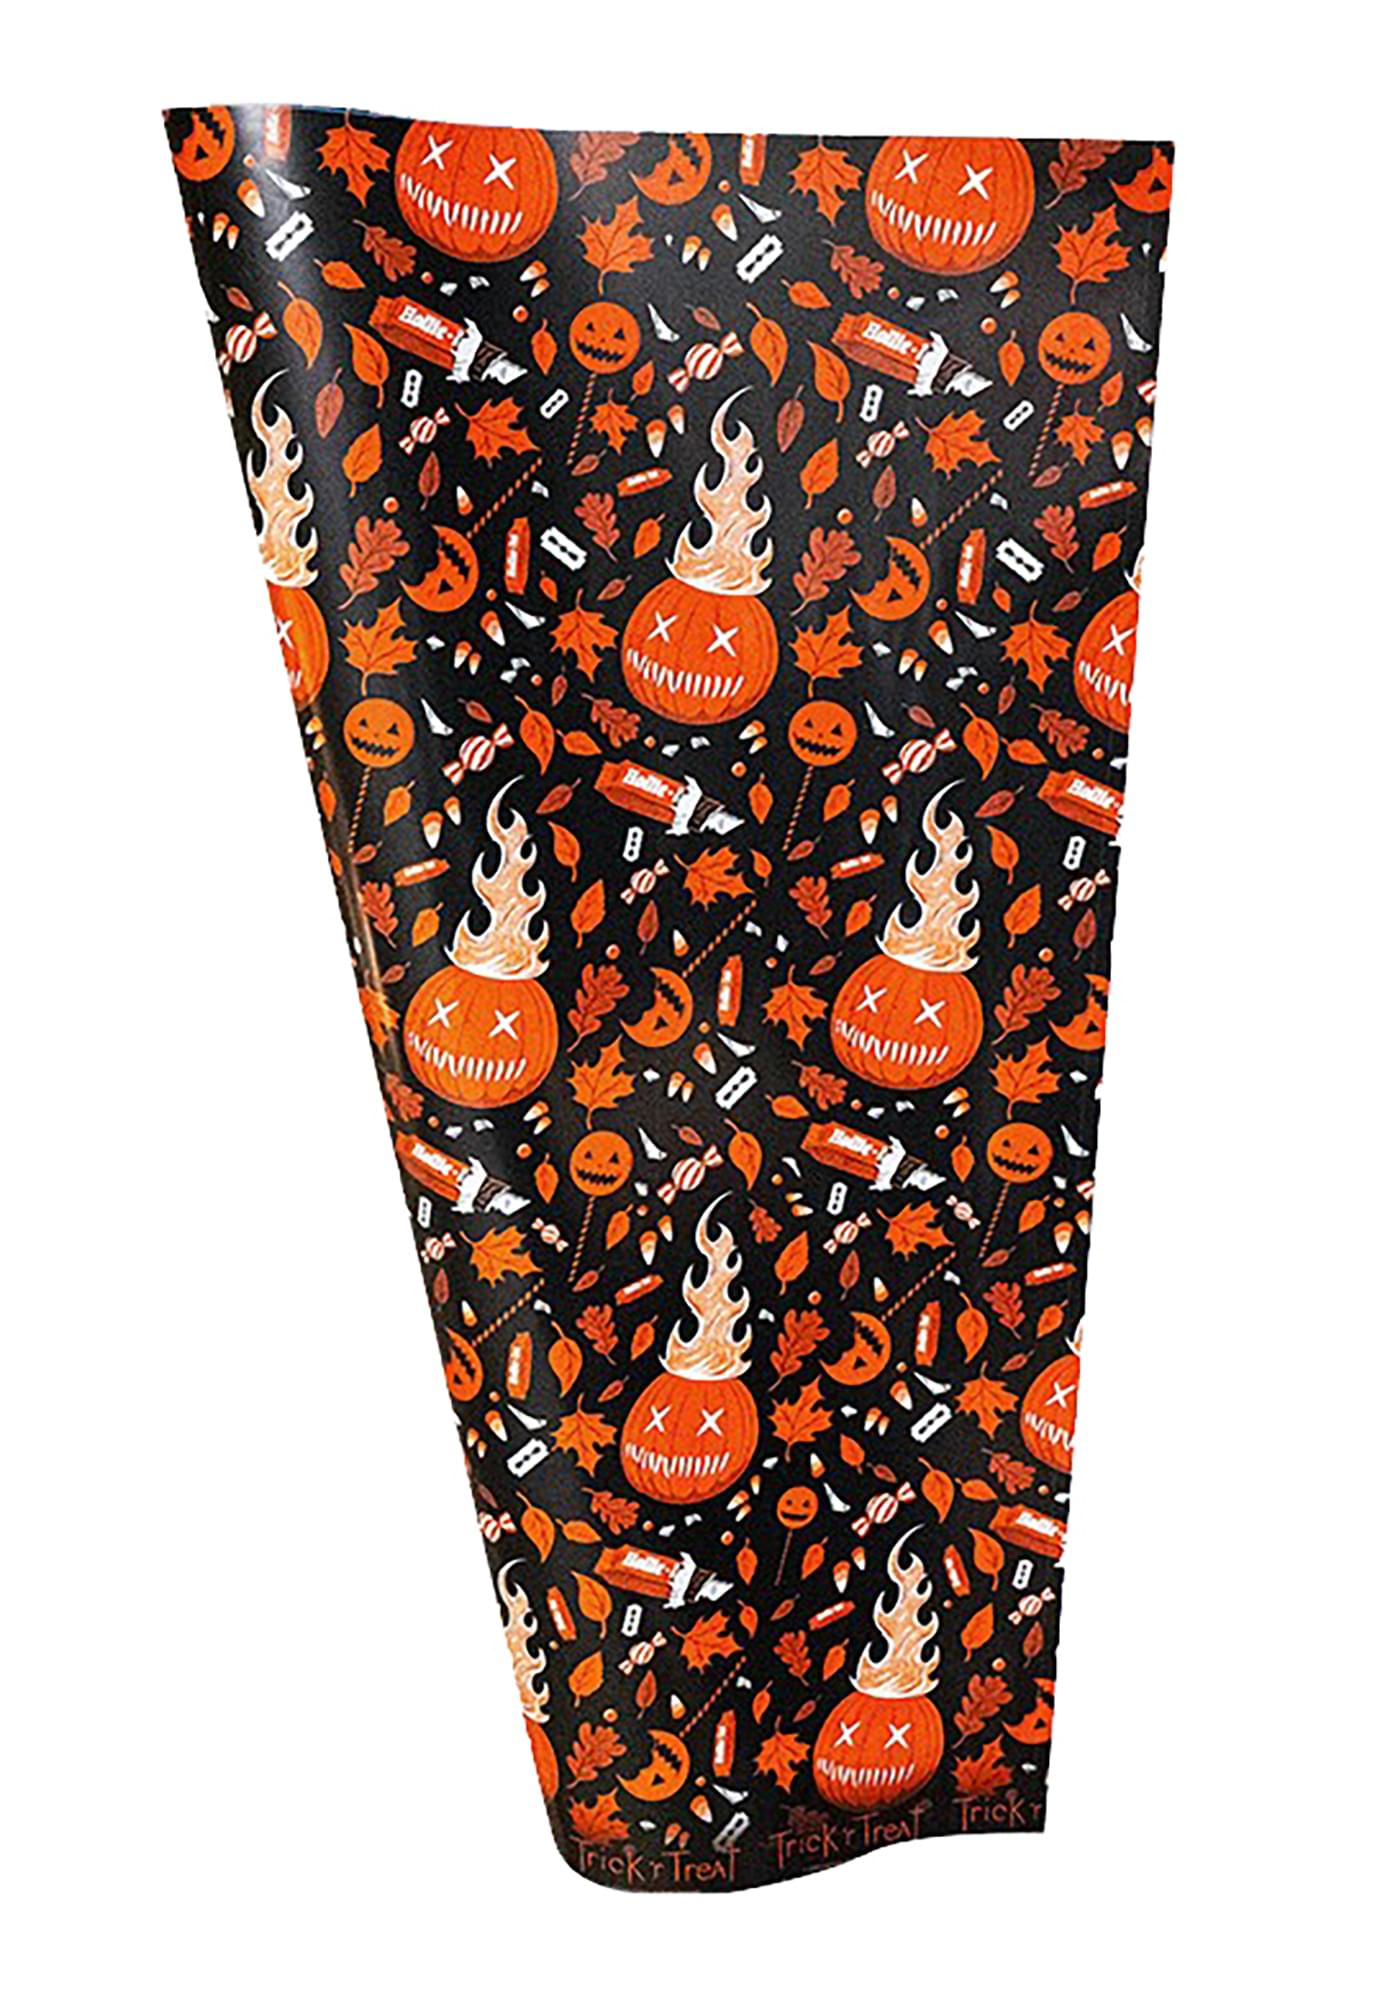 Trick R Treat Seasons Greetings Premium Wrapping Paper , 30 X 96 Inches